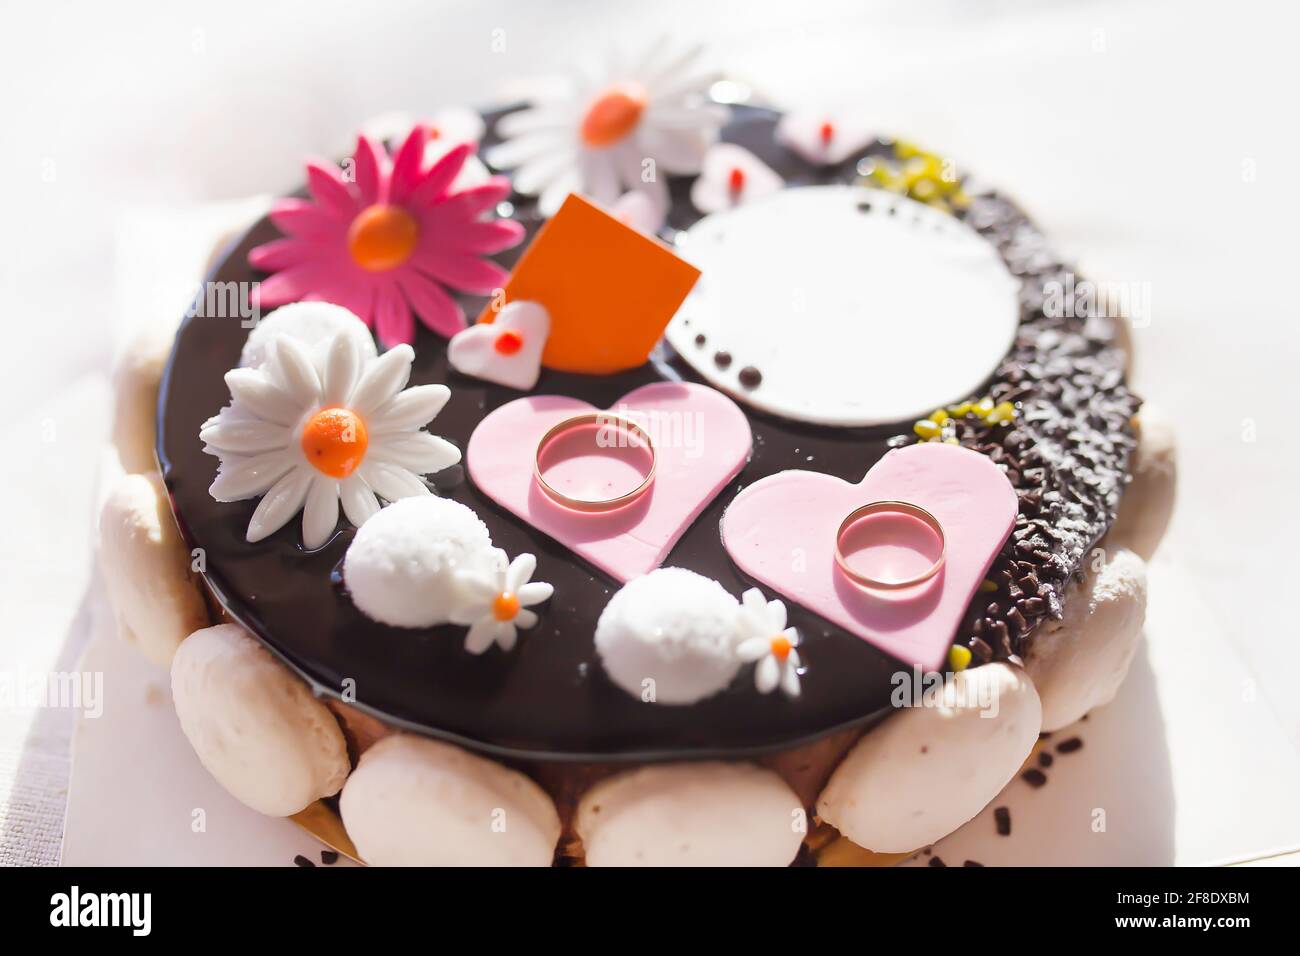 Engagement cake with a pair of gold rings decoration Stock Photo